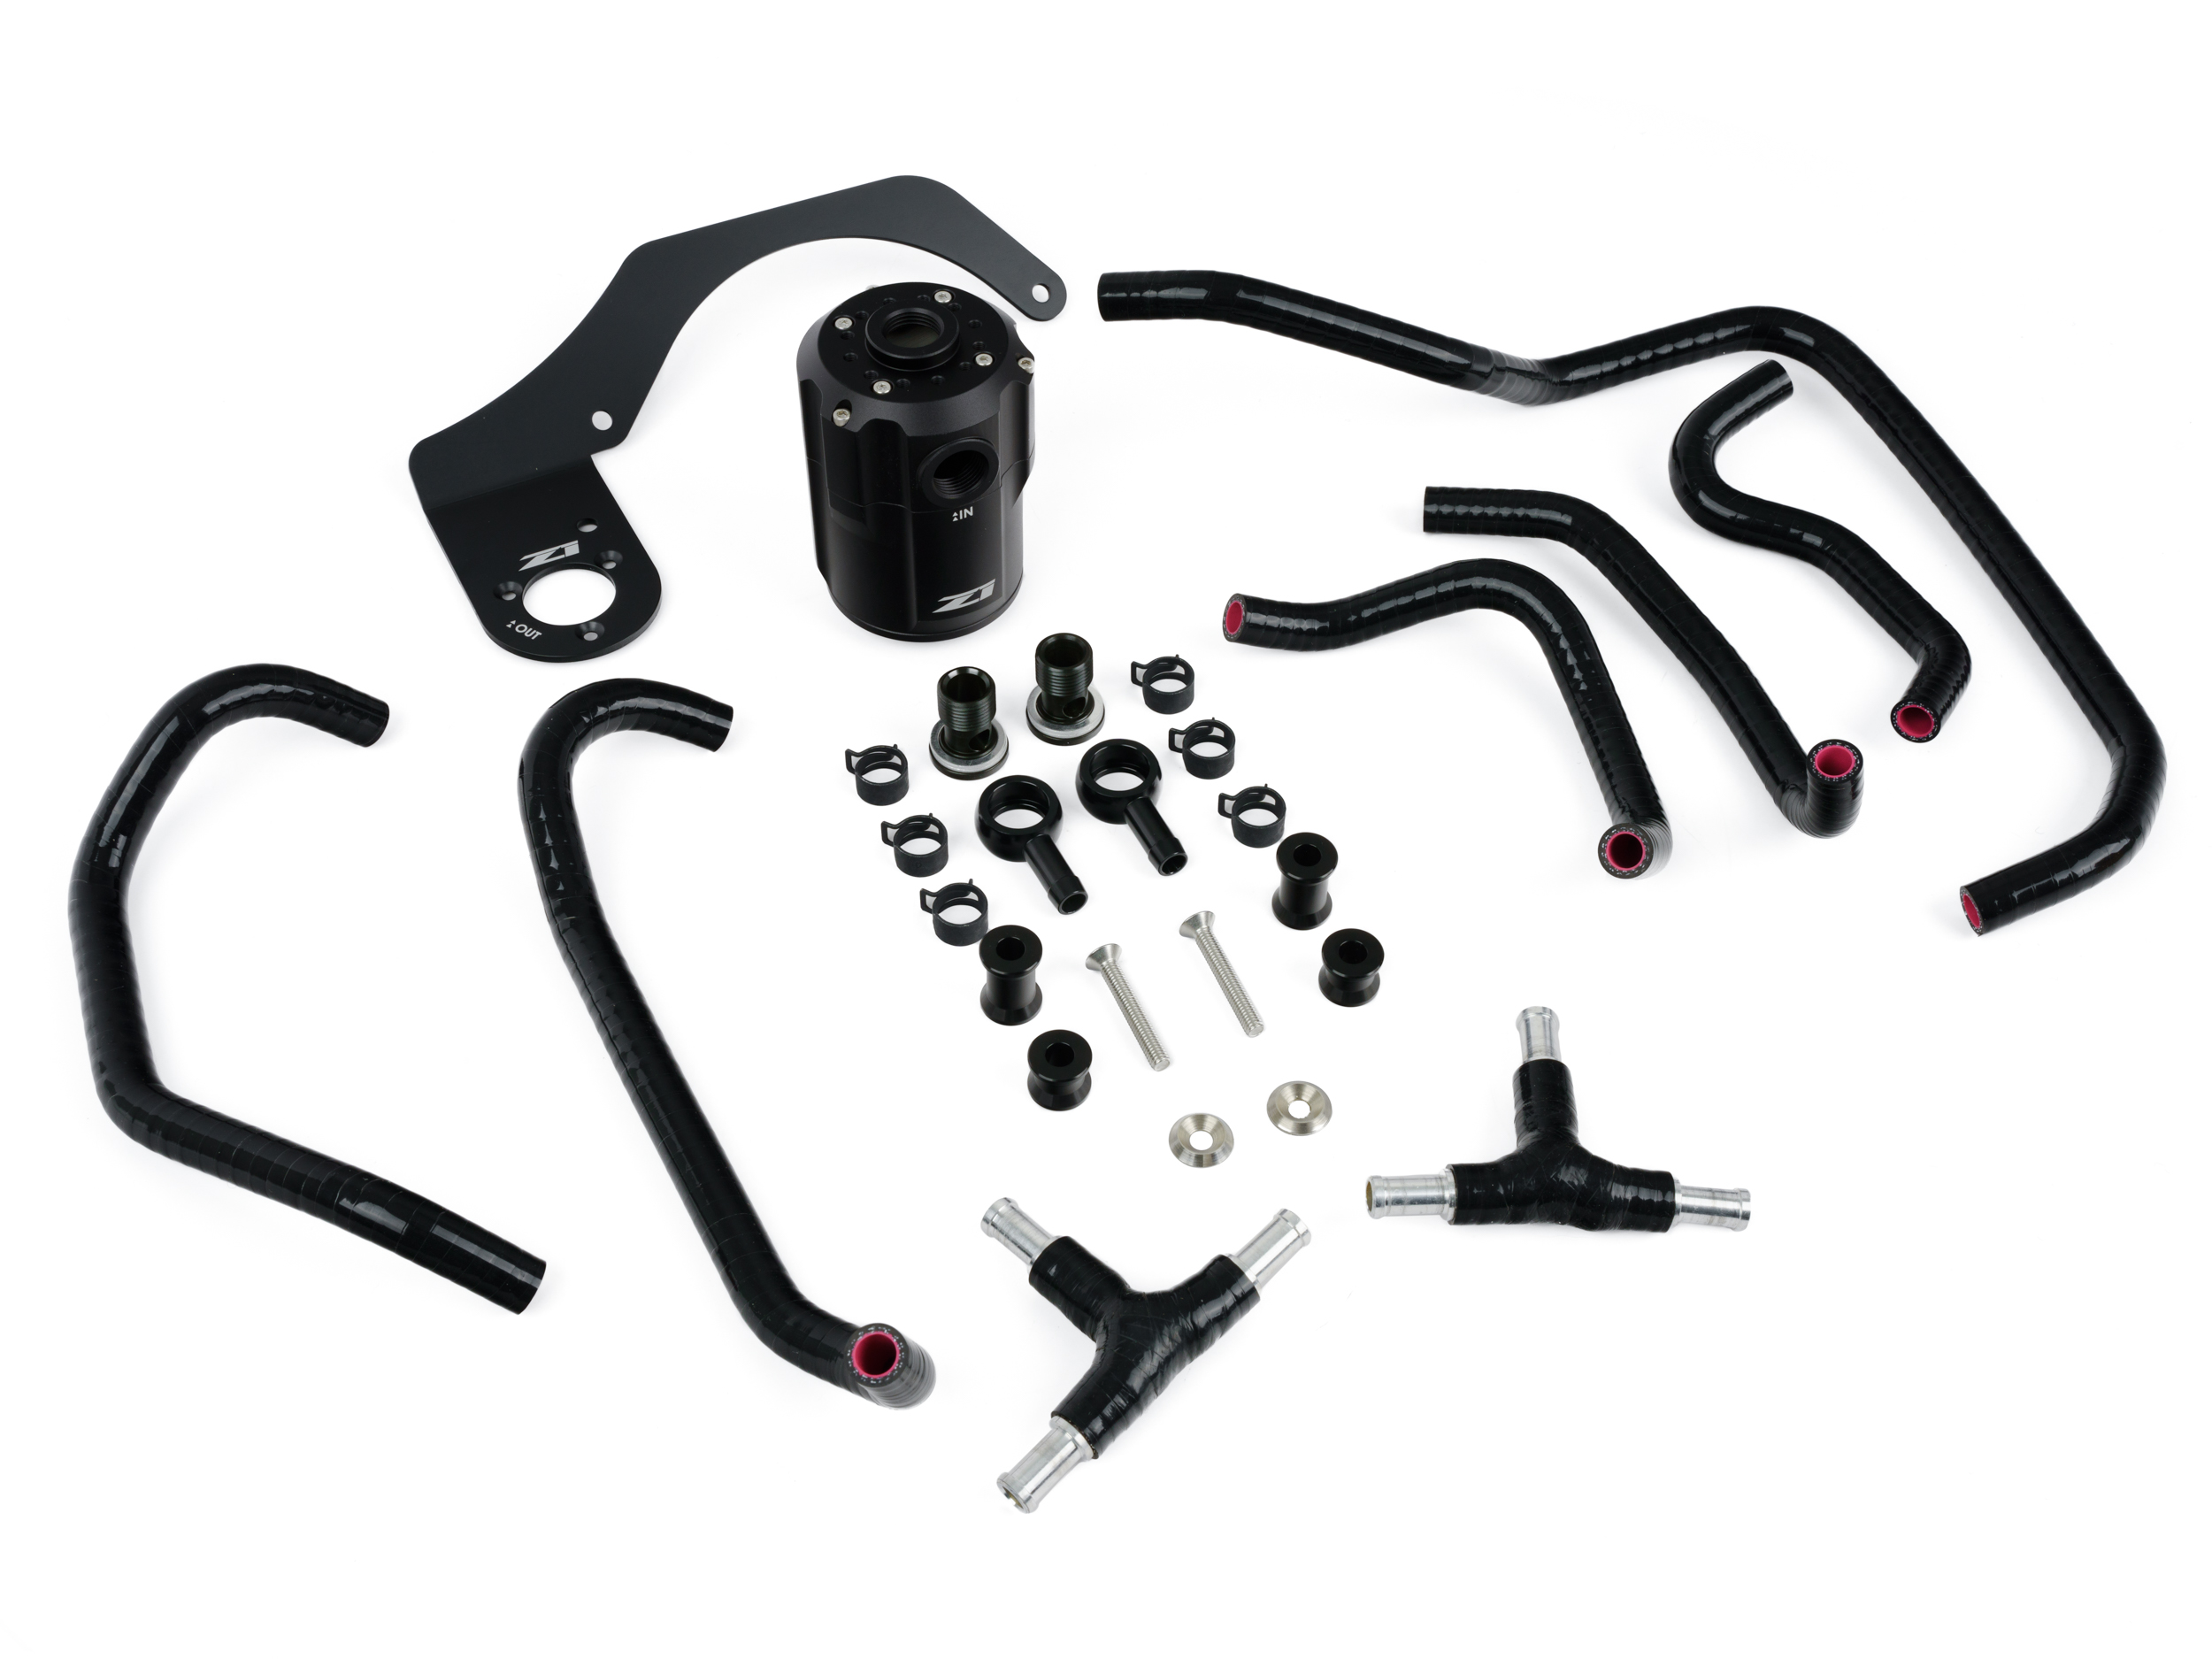 2004-2015 Nissan Titan Oil Catch Can Kit - Z1 Off-Road - Performance OEM  and Aftermarket Engineered Parts Global Leader Nissan Truck & SUV